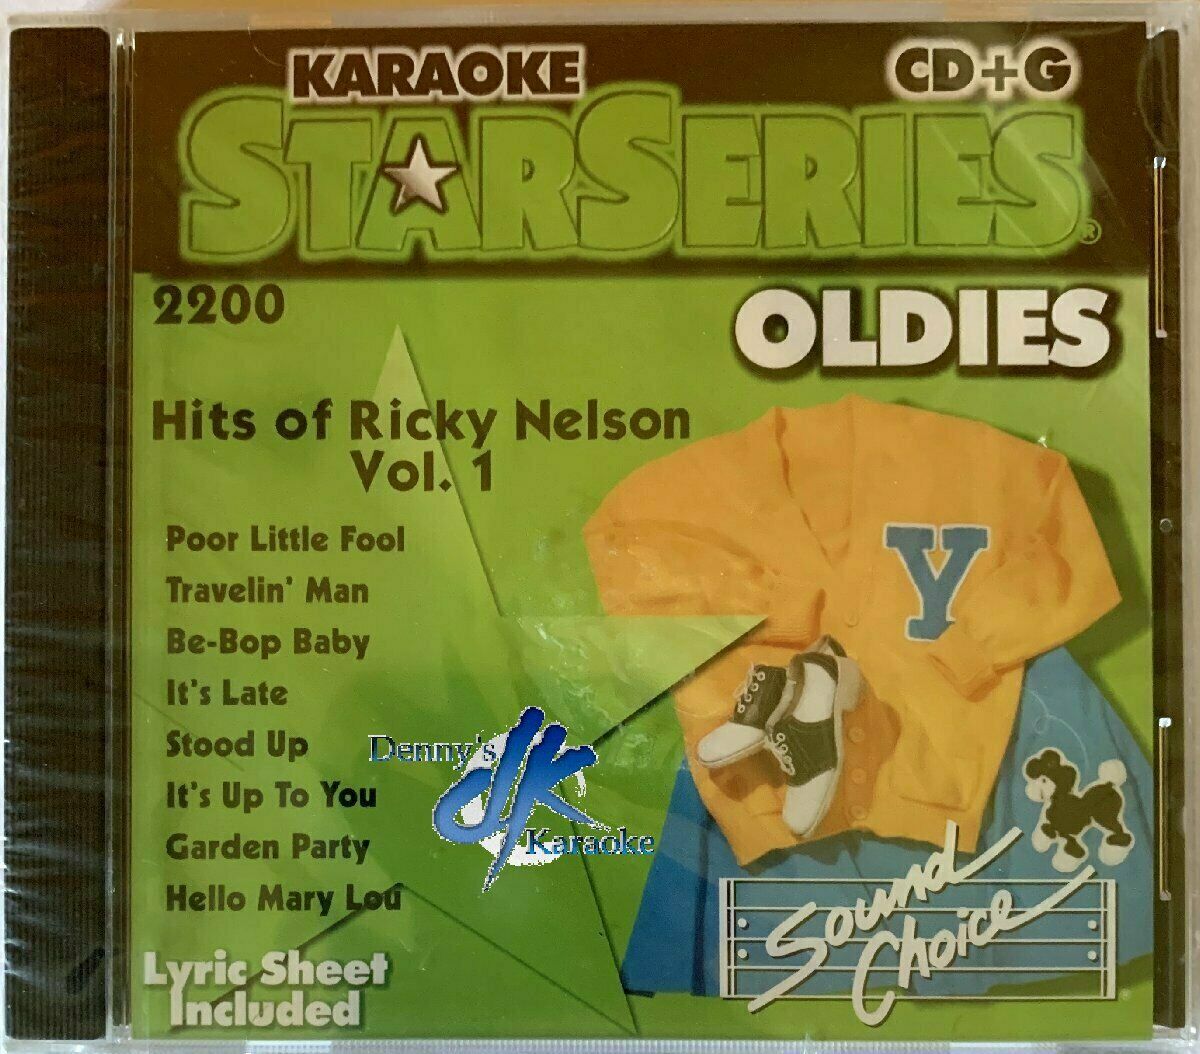 SOUND CHOICE STAR SERIES OLDIES Brand new - HITS Spasm price 1 NELSON OF VOL SC2 RICKY